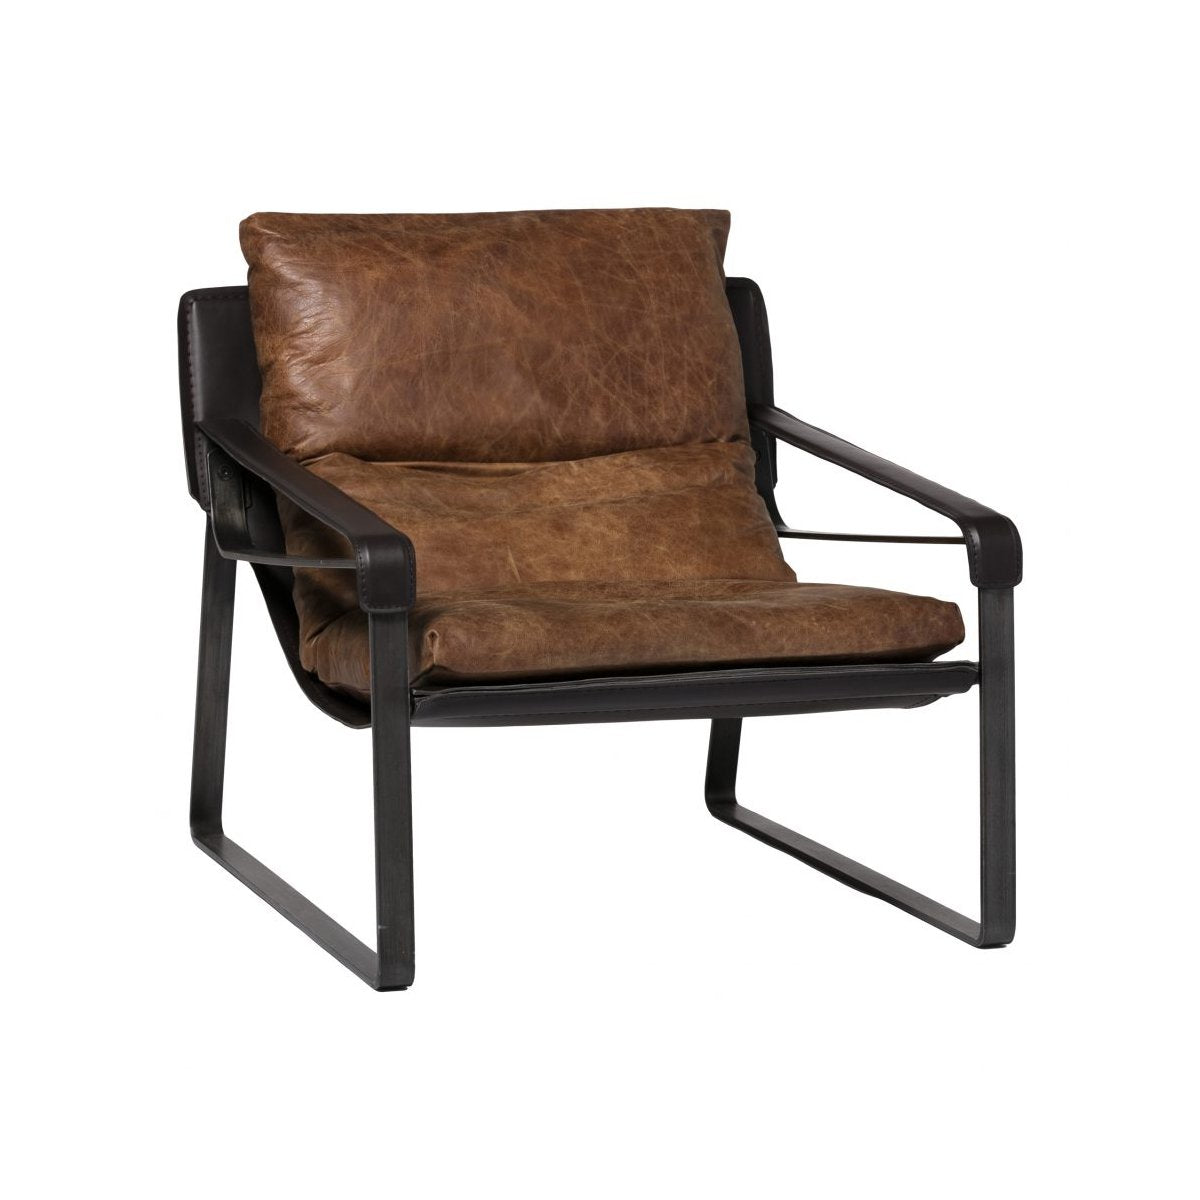 Load image into Gallery viewer, Connor Club Chair Occasional Chairs Moe&amp;#39;s     Four Hands, Burke Decor, Mid Century Modern Furniture, Old Bones Furniture Company, Old Bones Co, Modern Mid Century, Designer Furniture, https://www.oldbonesco.com/
